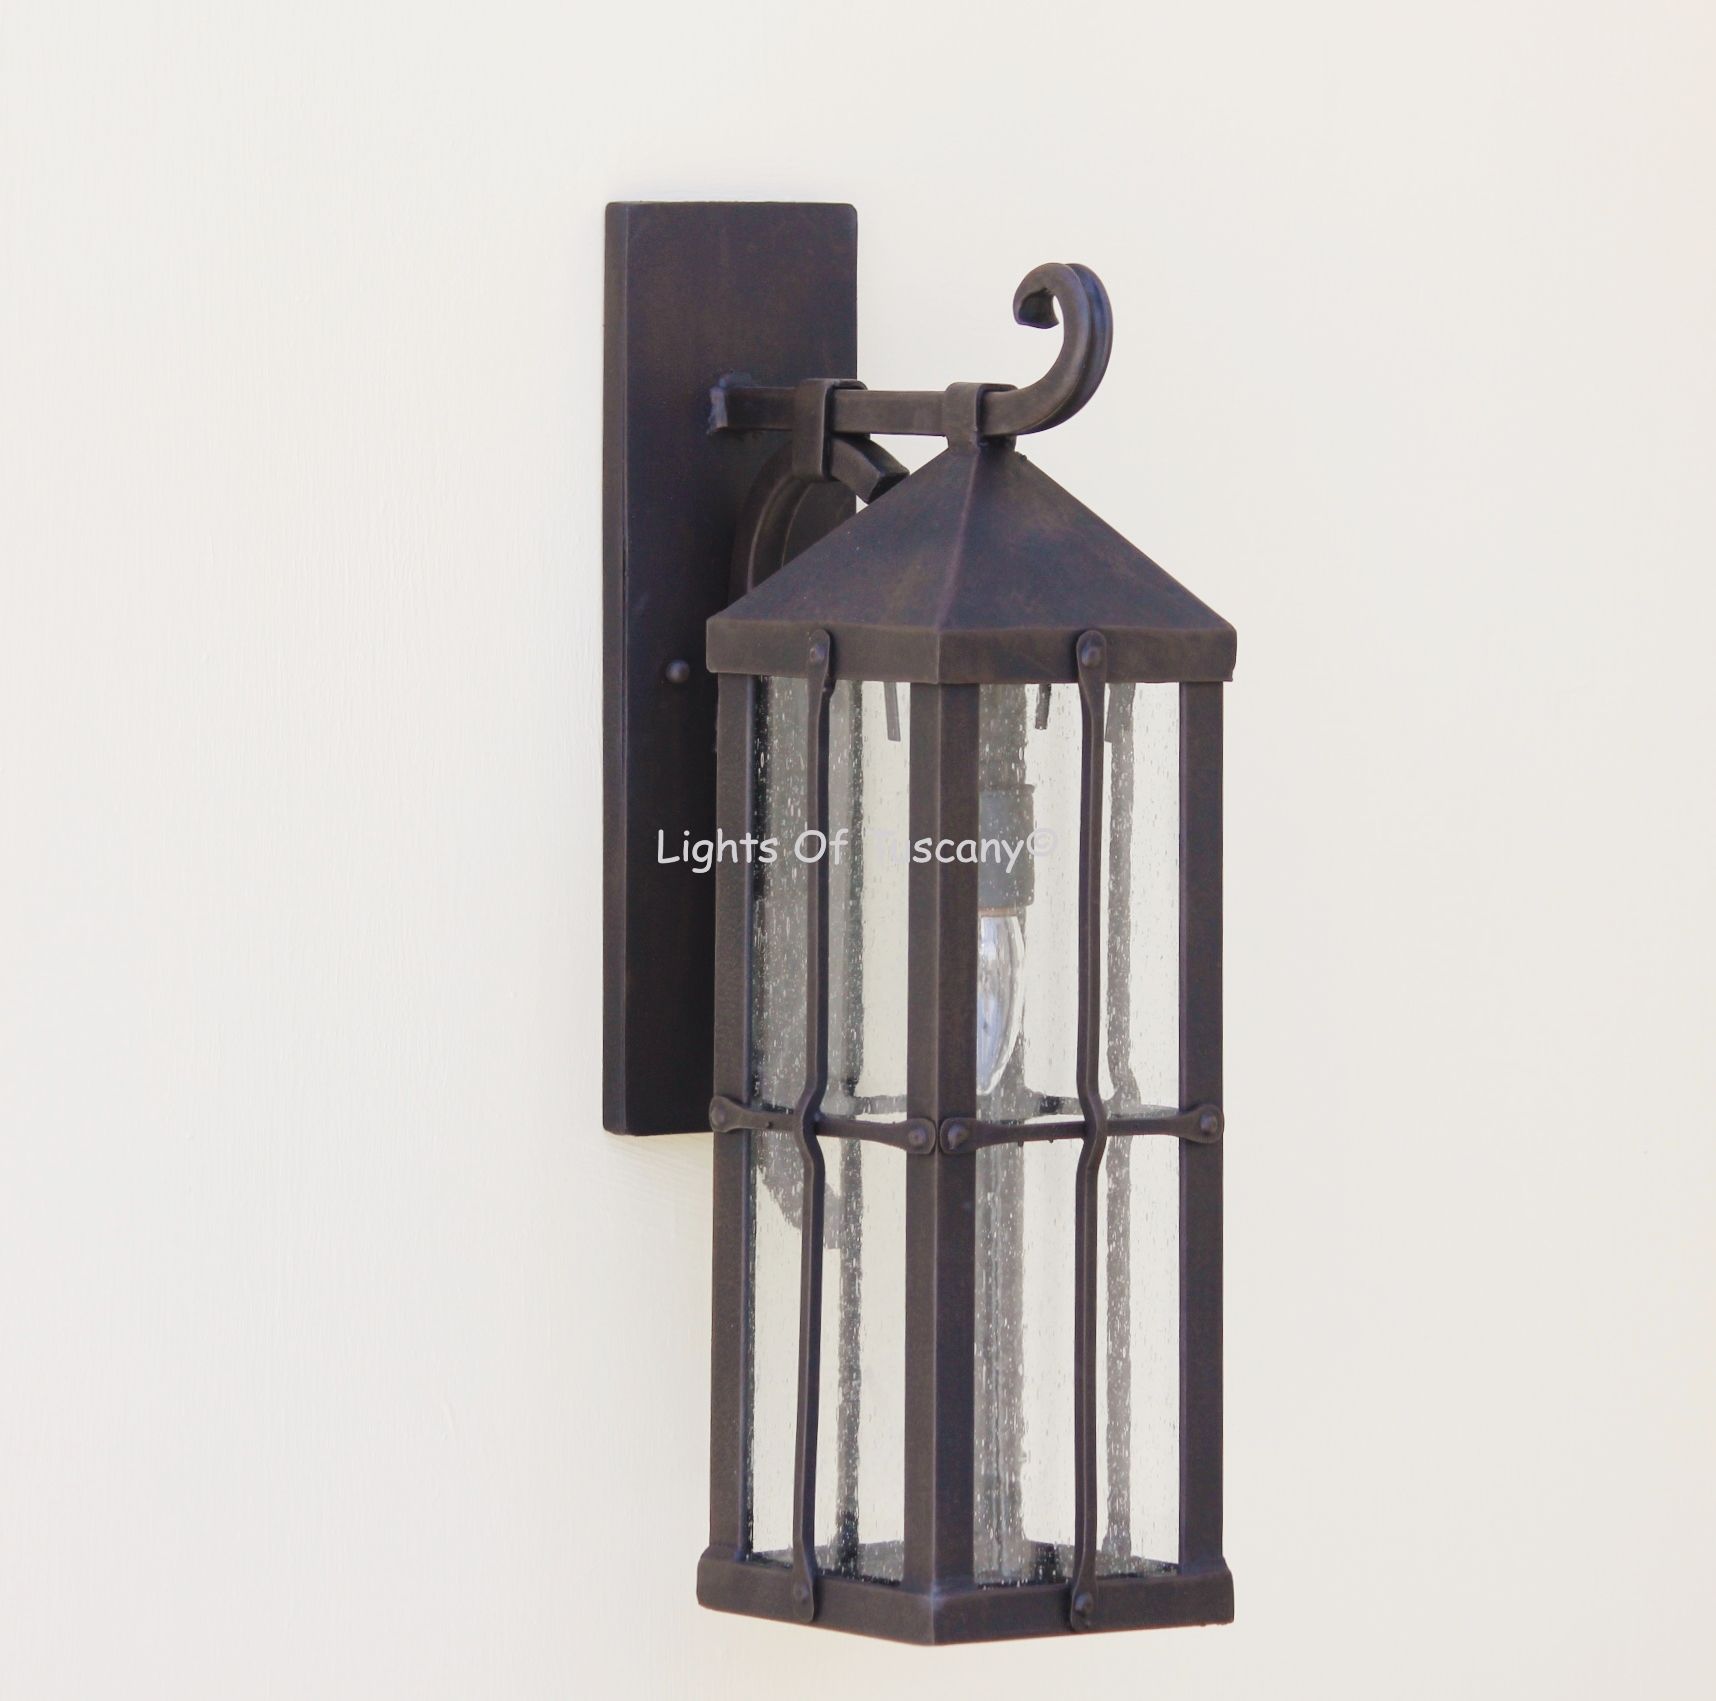 Lights of Tuscany 7002-1 Spanish-Contemporary Wrought Iron Outdoor Lighting  Fixture